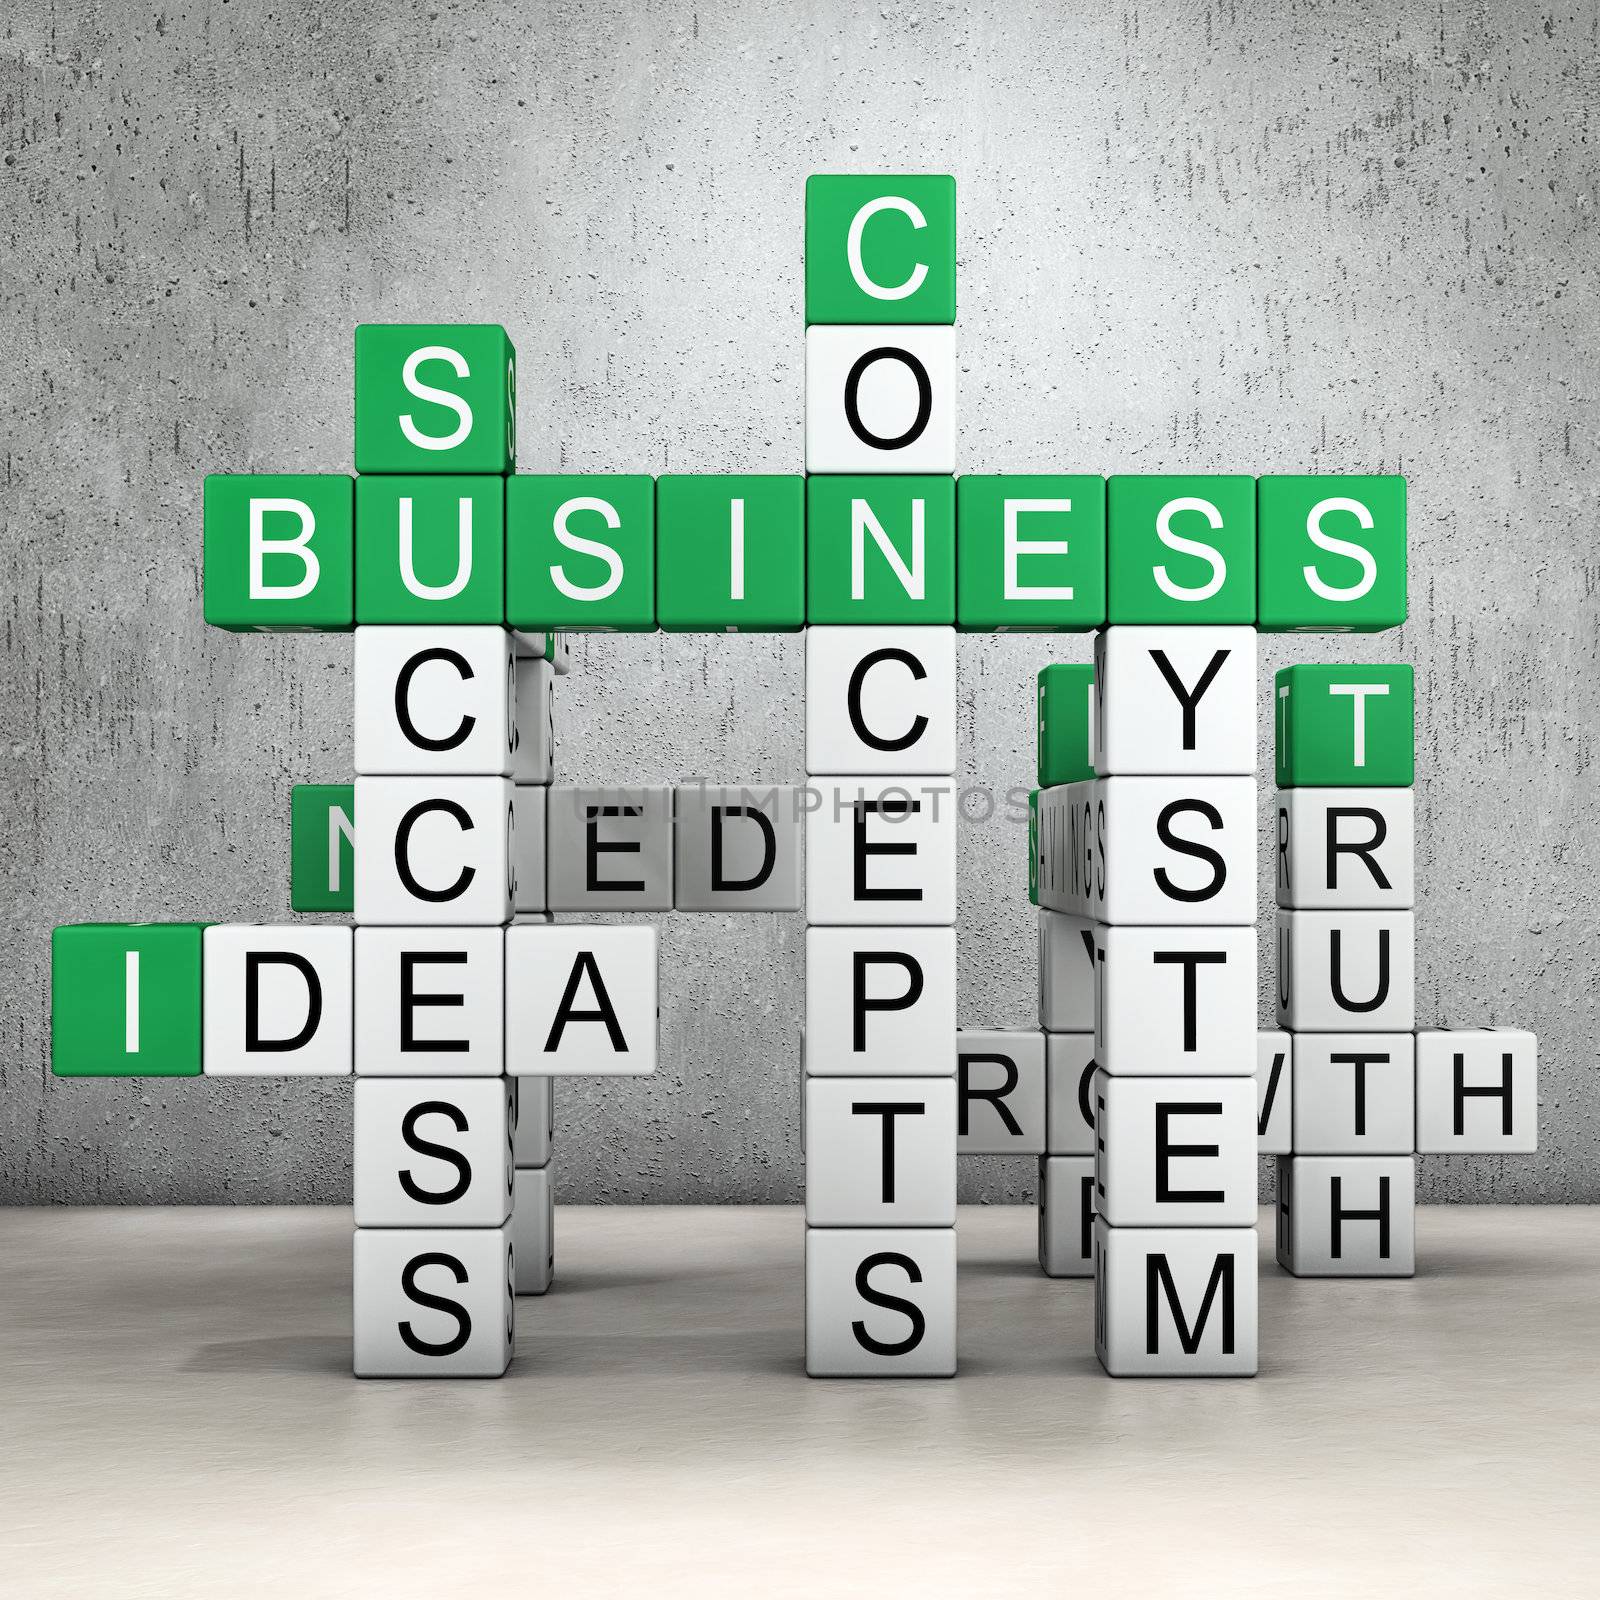 Crosswords with several business related words